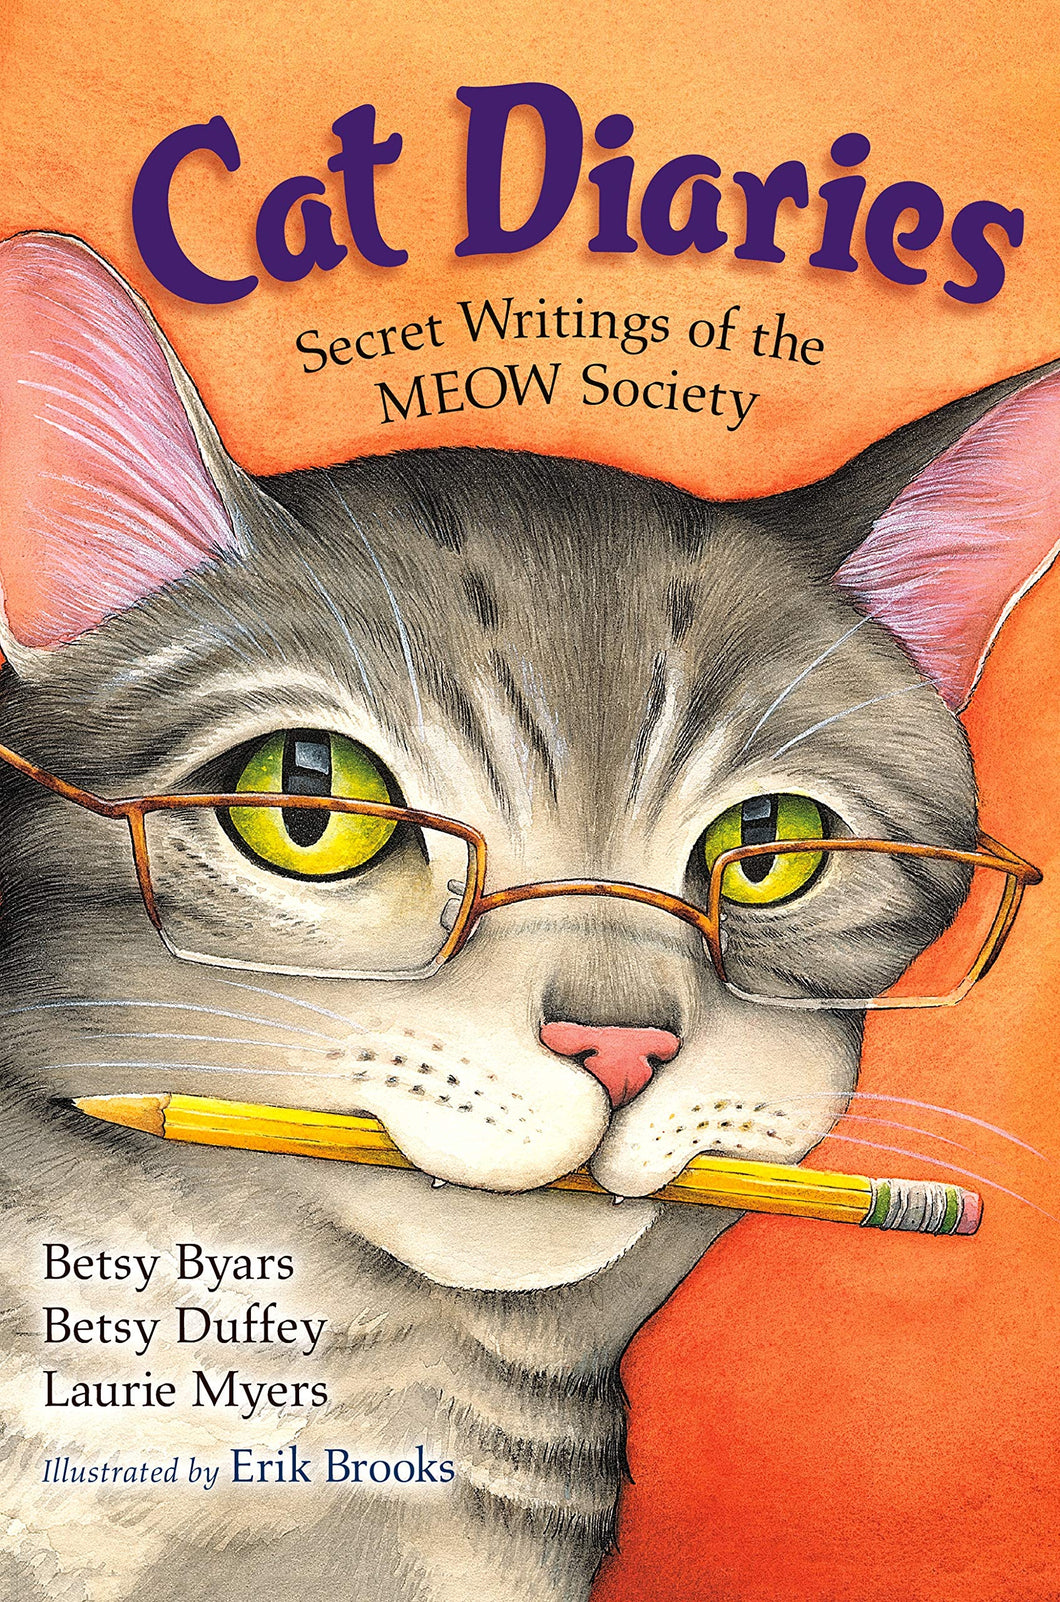 Cat Diaries: Secret Writings of the Meow Society by Betsy Cromer Byars, Laurie Myers & Betsy Duffey / Paperback - NEW BOOK